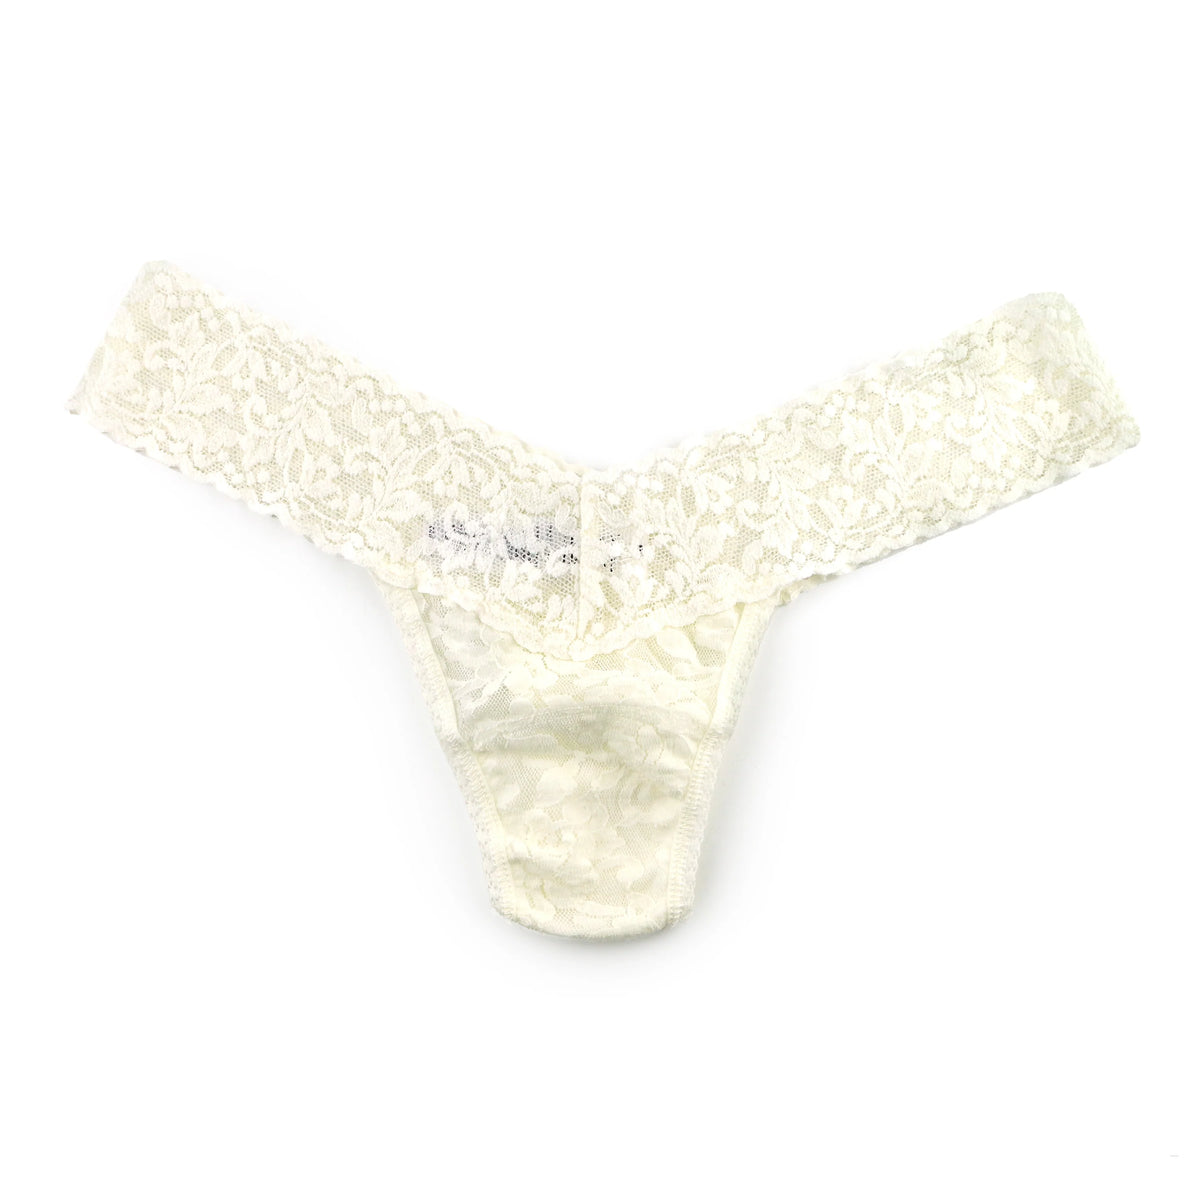 HANKY PANKY SIGNATURE LACE LOW RISE THONG – Tops & Bottoms